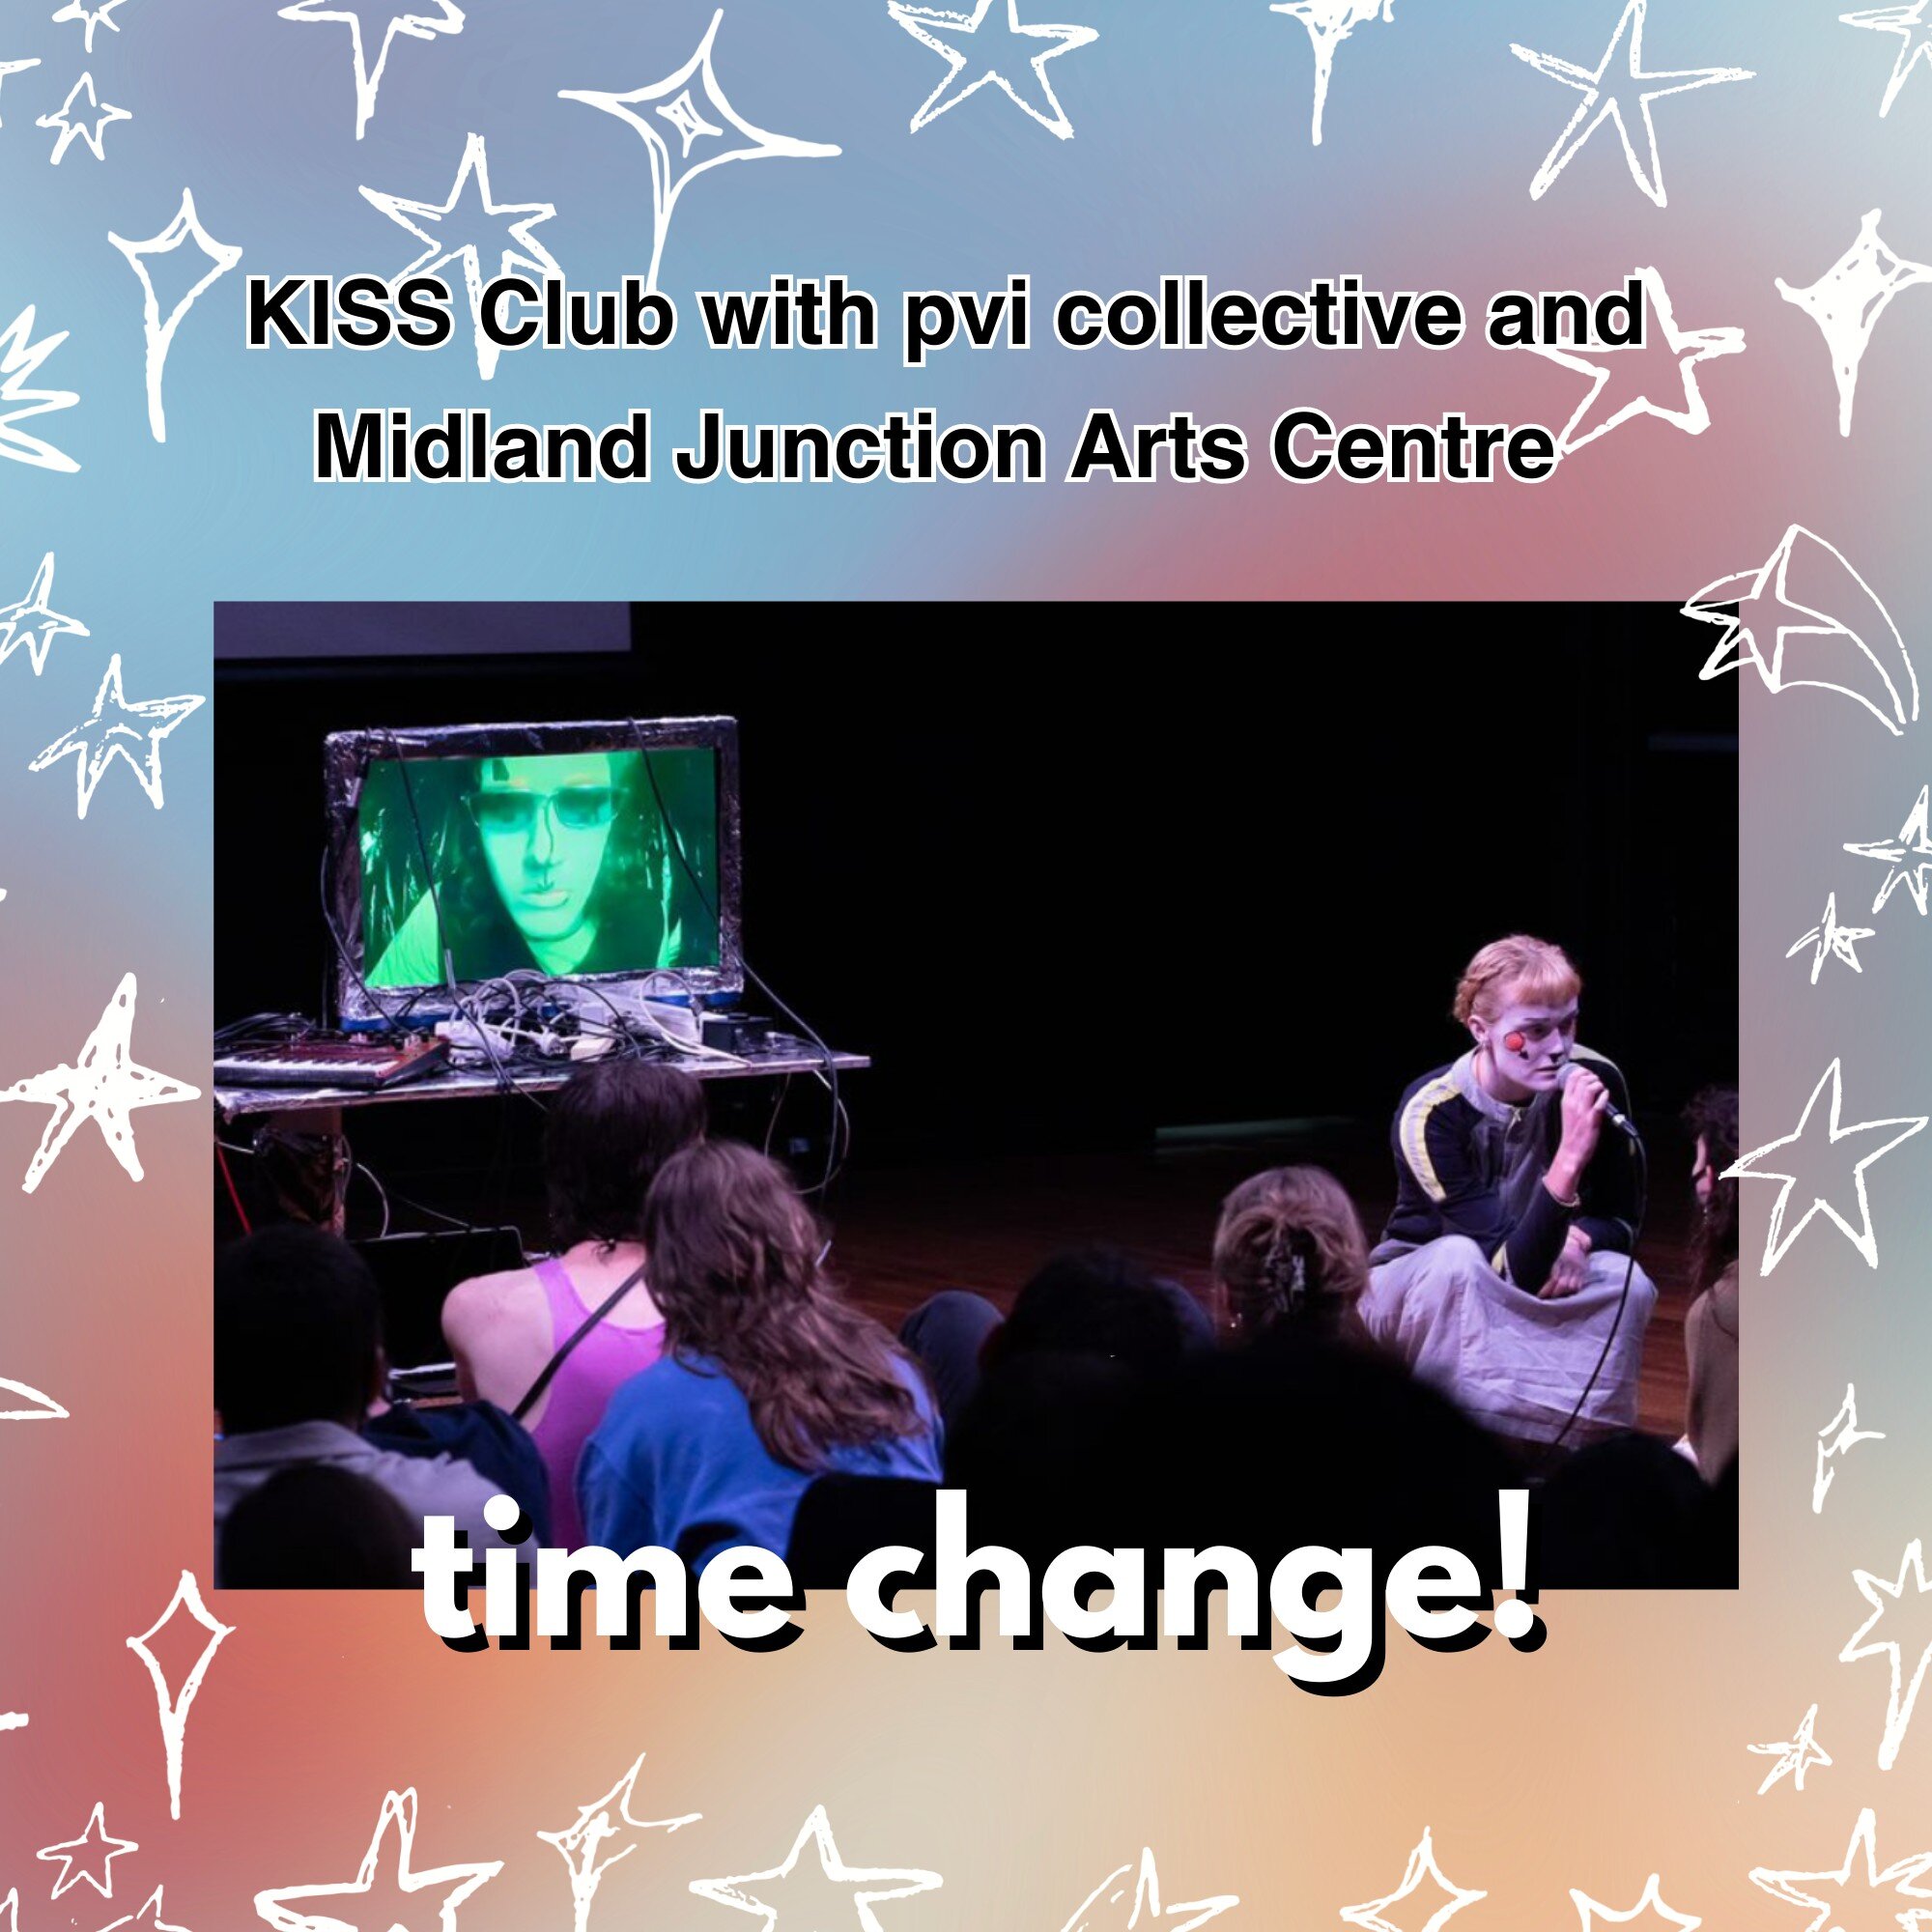 There has been a correction to one of the events happening next week: KISS Club with @pvicollective and @midlandjunctionartscentre (APRIL 19th + 20th) will start at 7:00pm, NOT 6:00pm as previously stated on our socials/kickstART website. 

⭐️ Here's